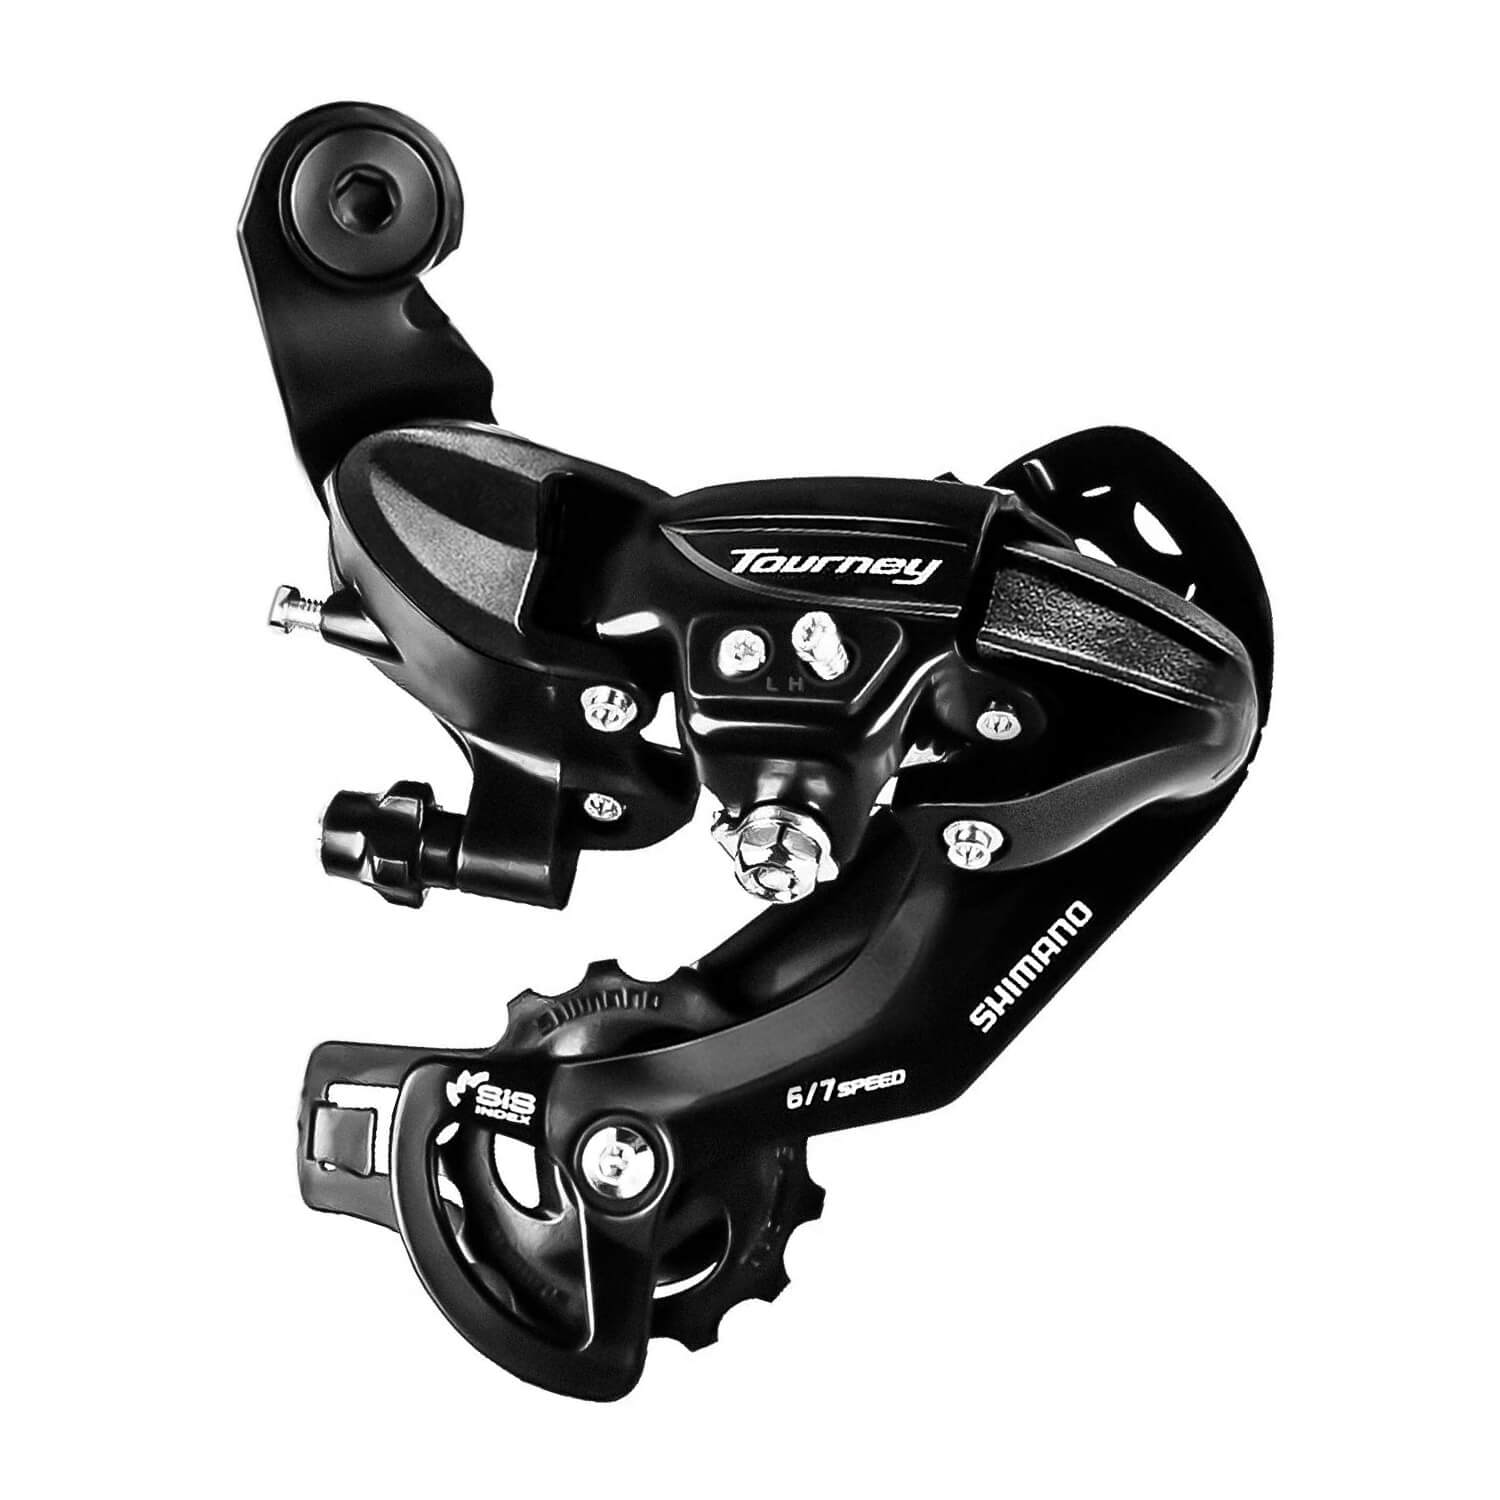 The wallke ebike-Rear Derailleur is precisely designed, suitable for wallke's wallke H6, wallke H6ST, wallke X3 Pro and other models, allowing you to more easily control various terrains